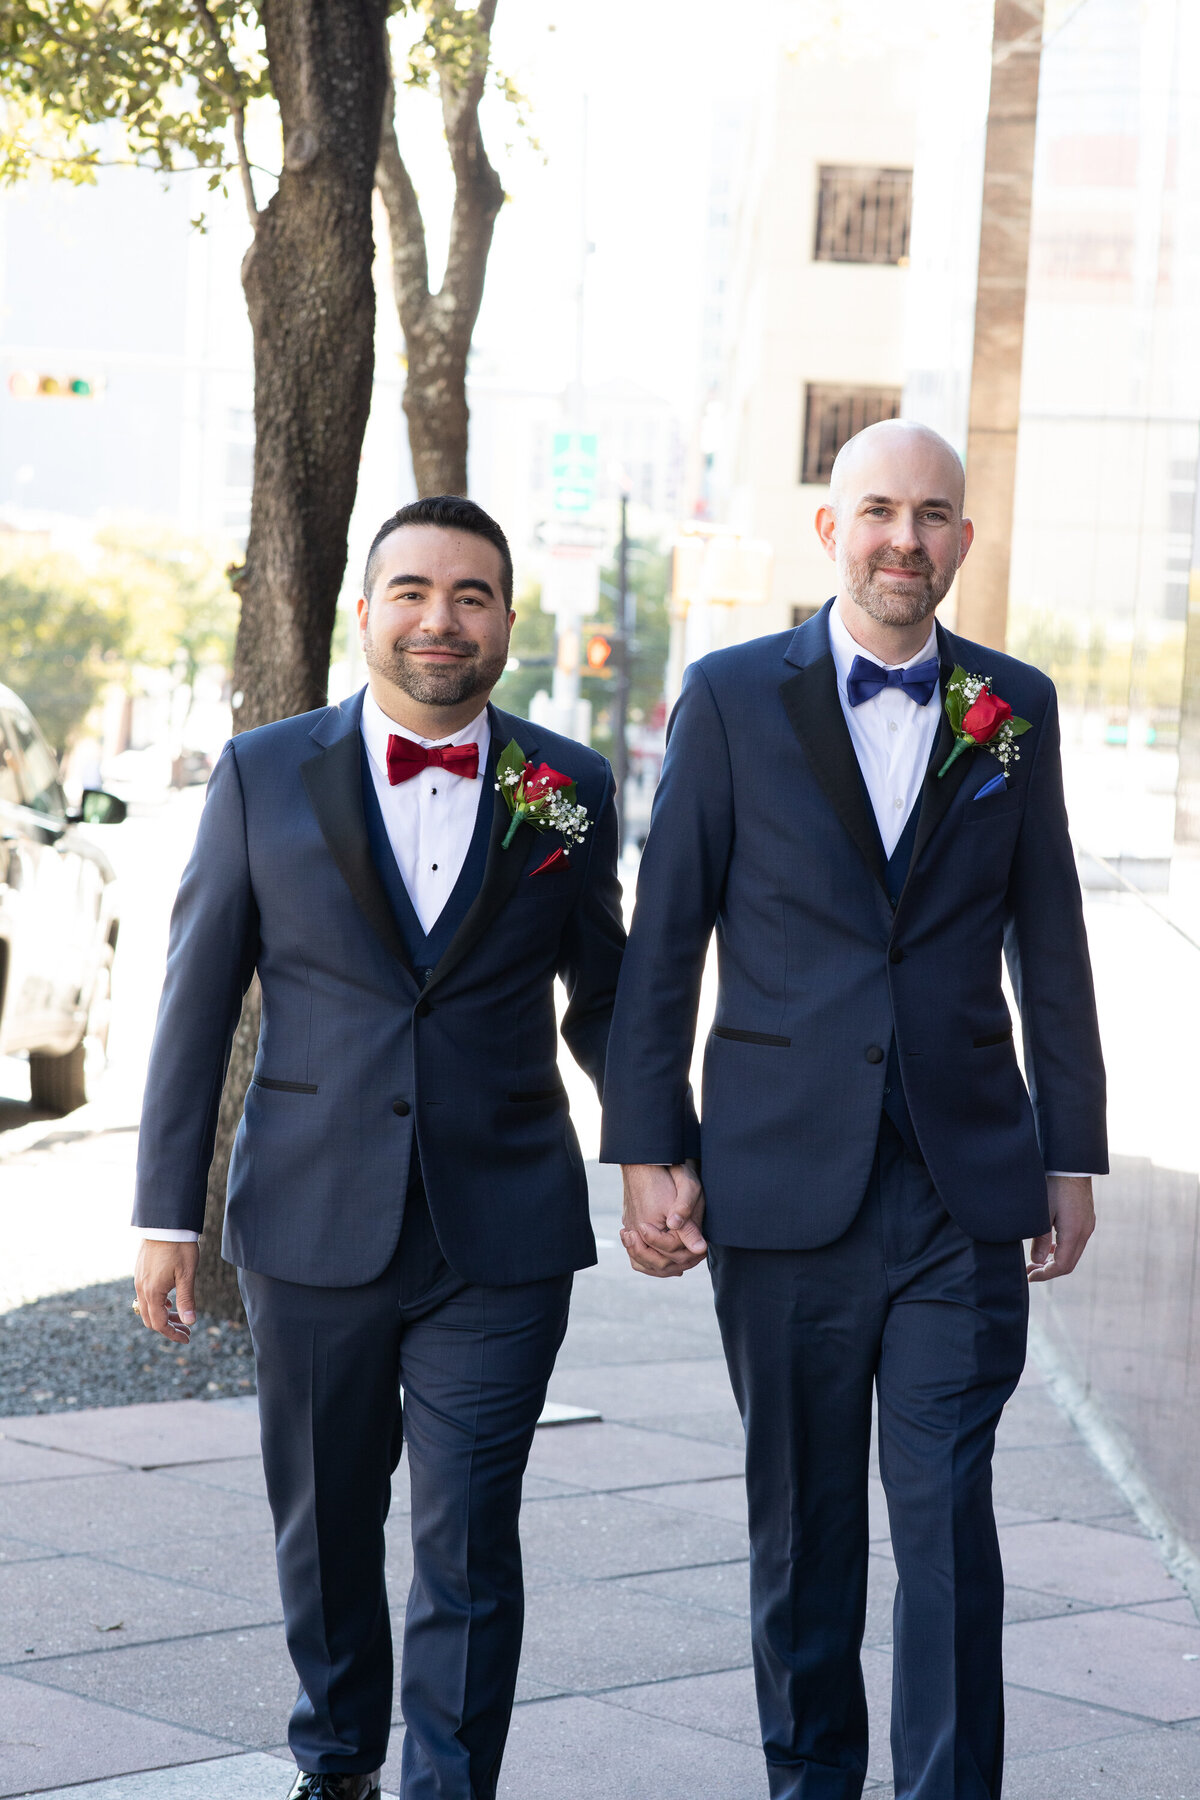 Austin wedding photographer captures two grooms in tuxedos walking down the street.